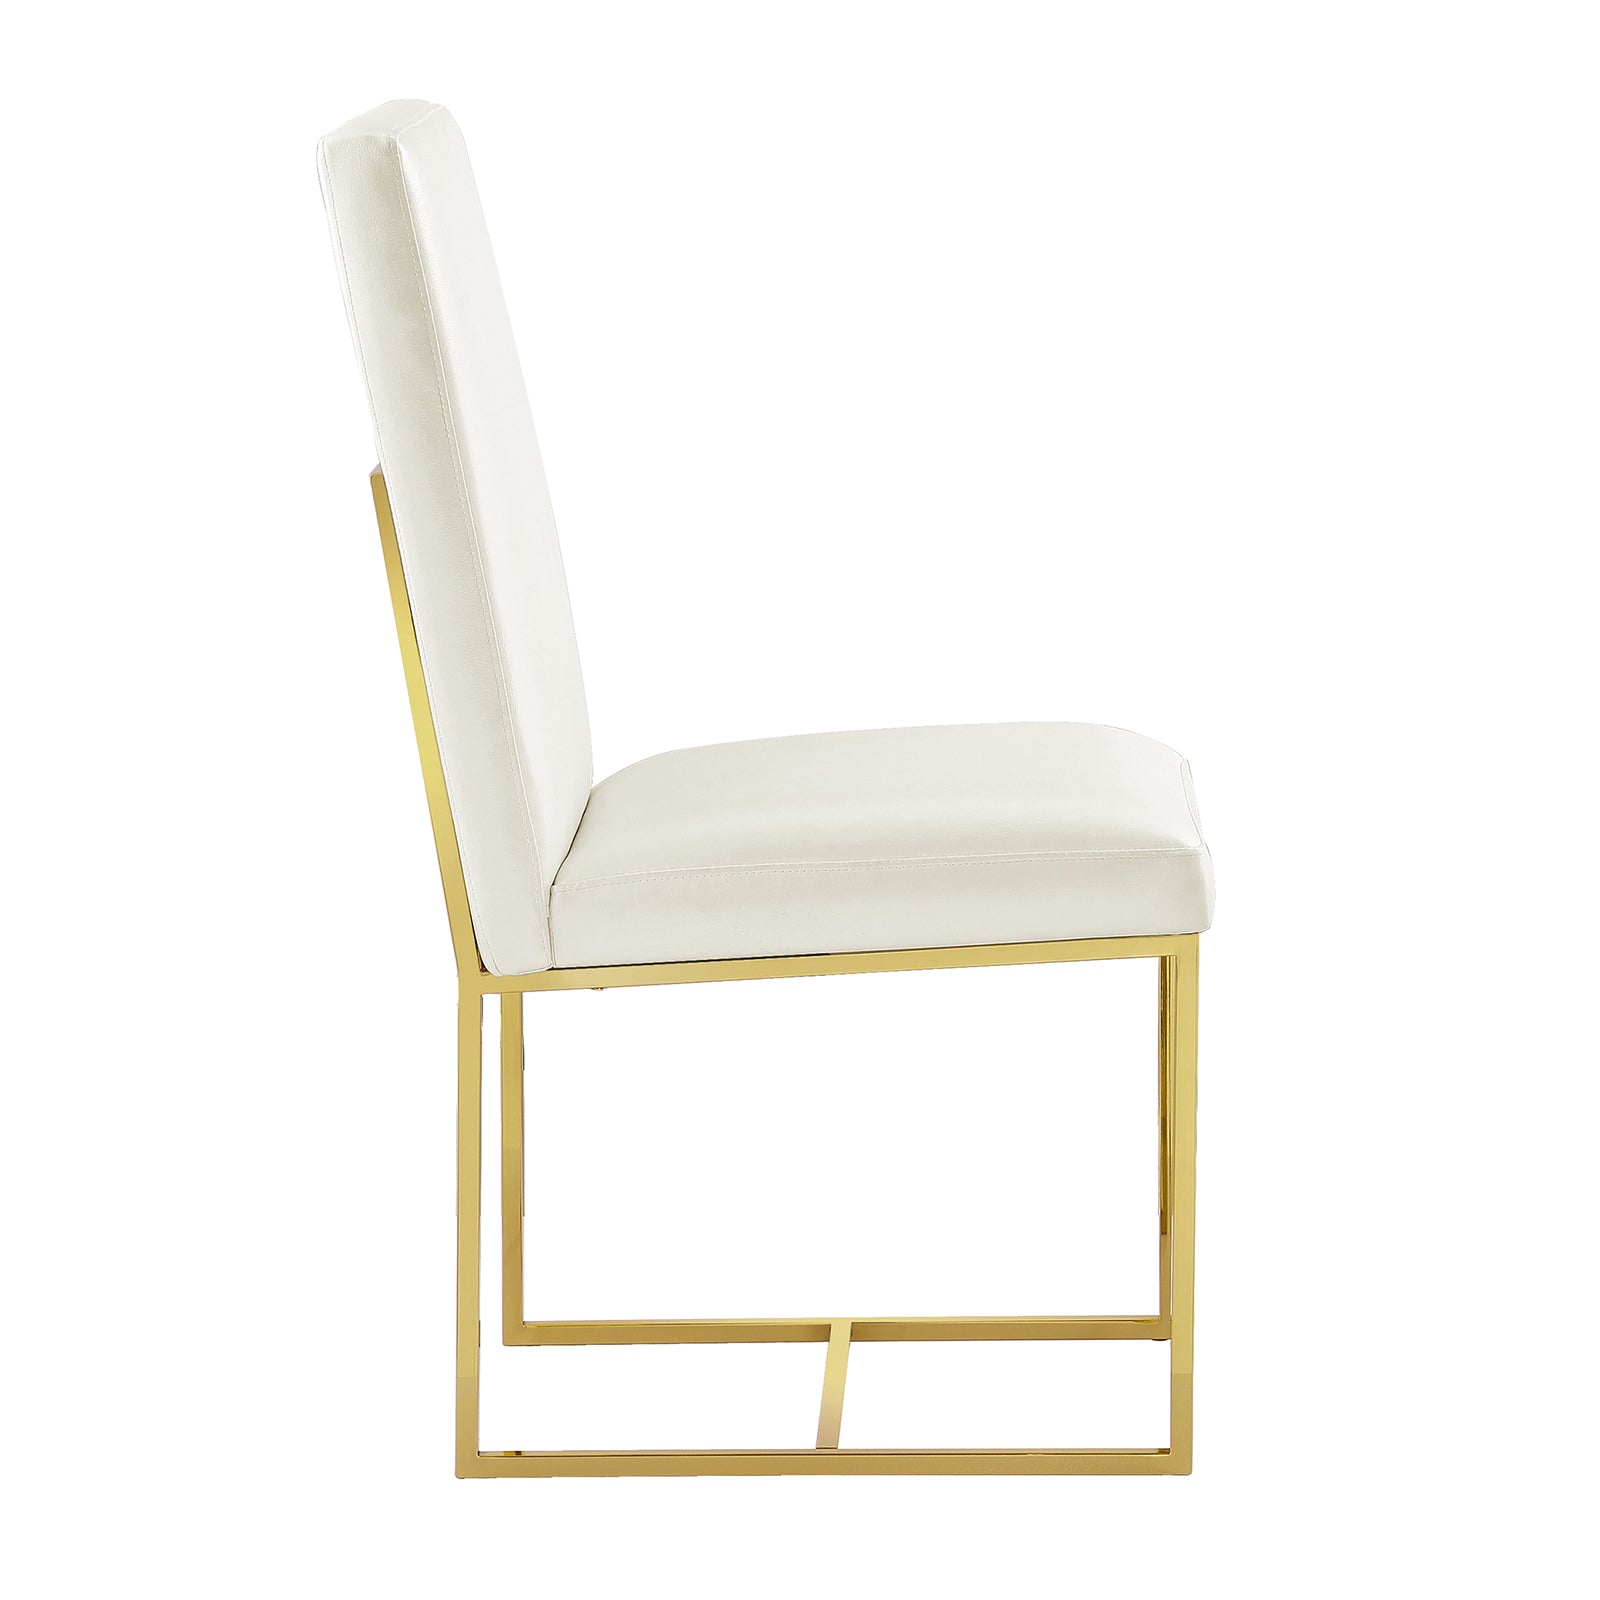 713 Set | AUZ White and Gold Dining room Sets for 6